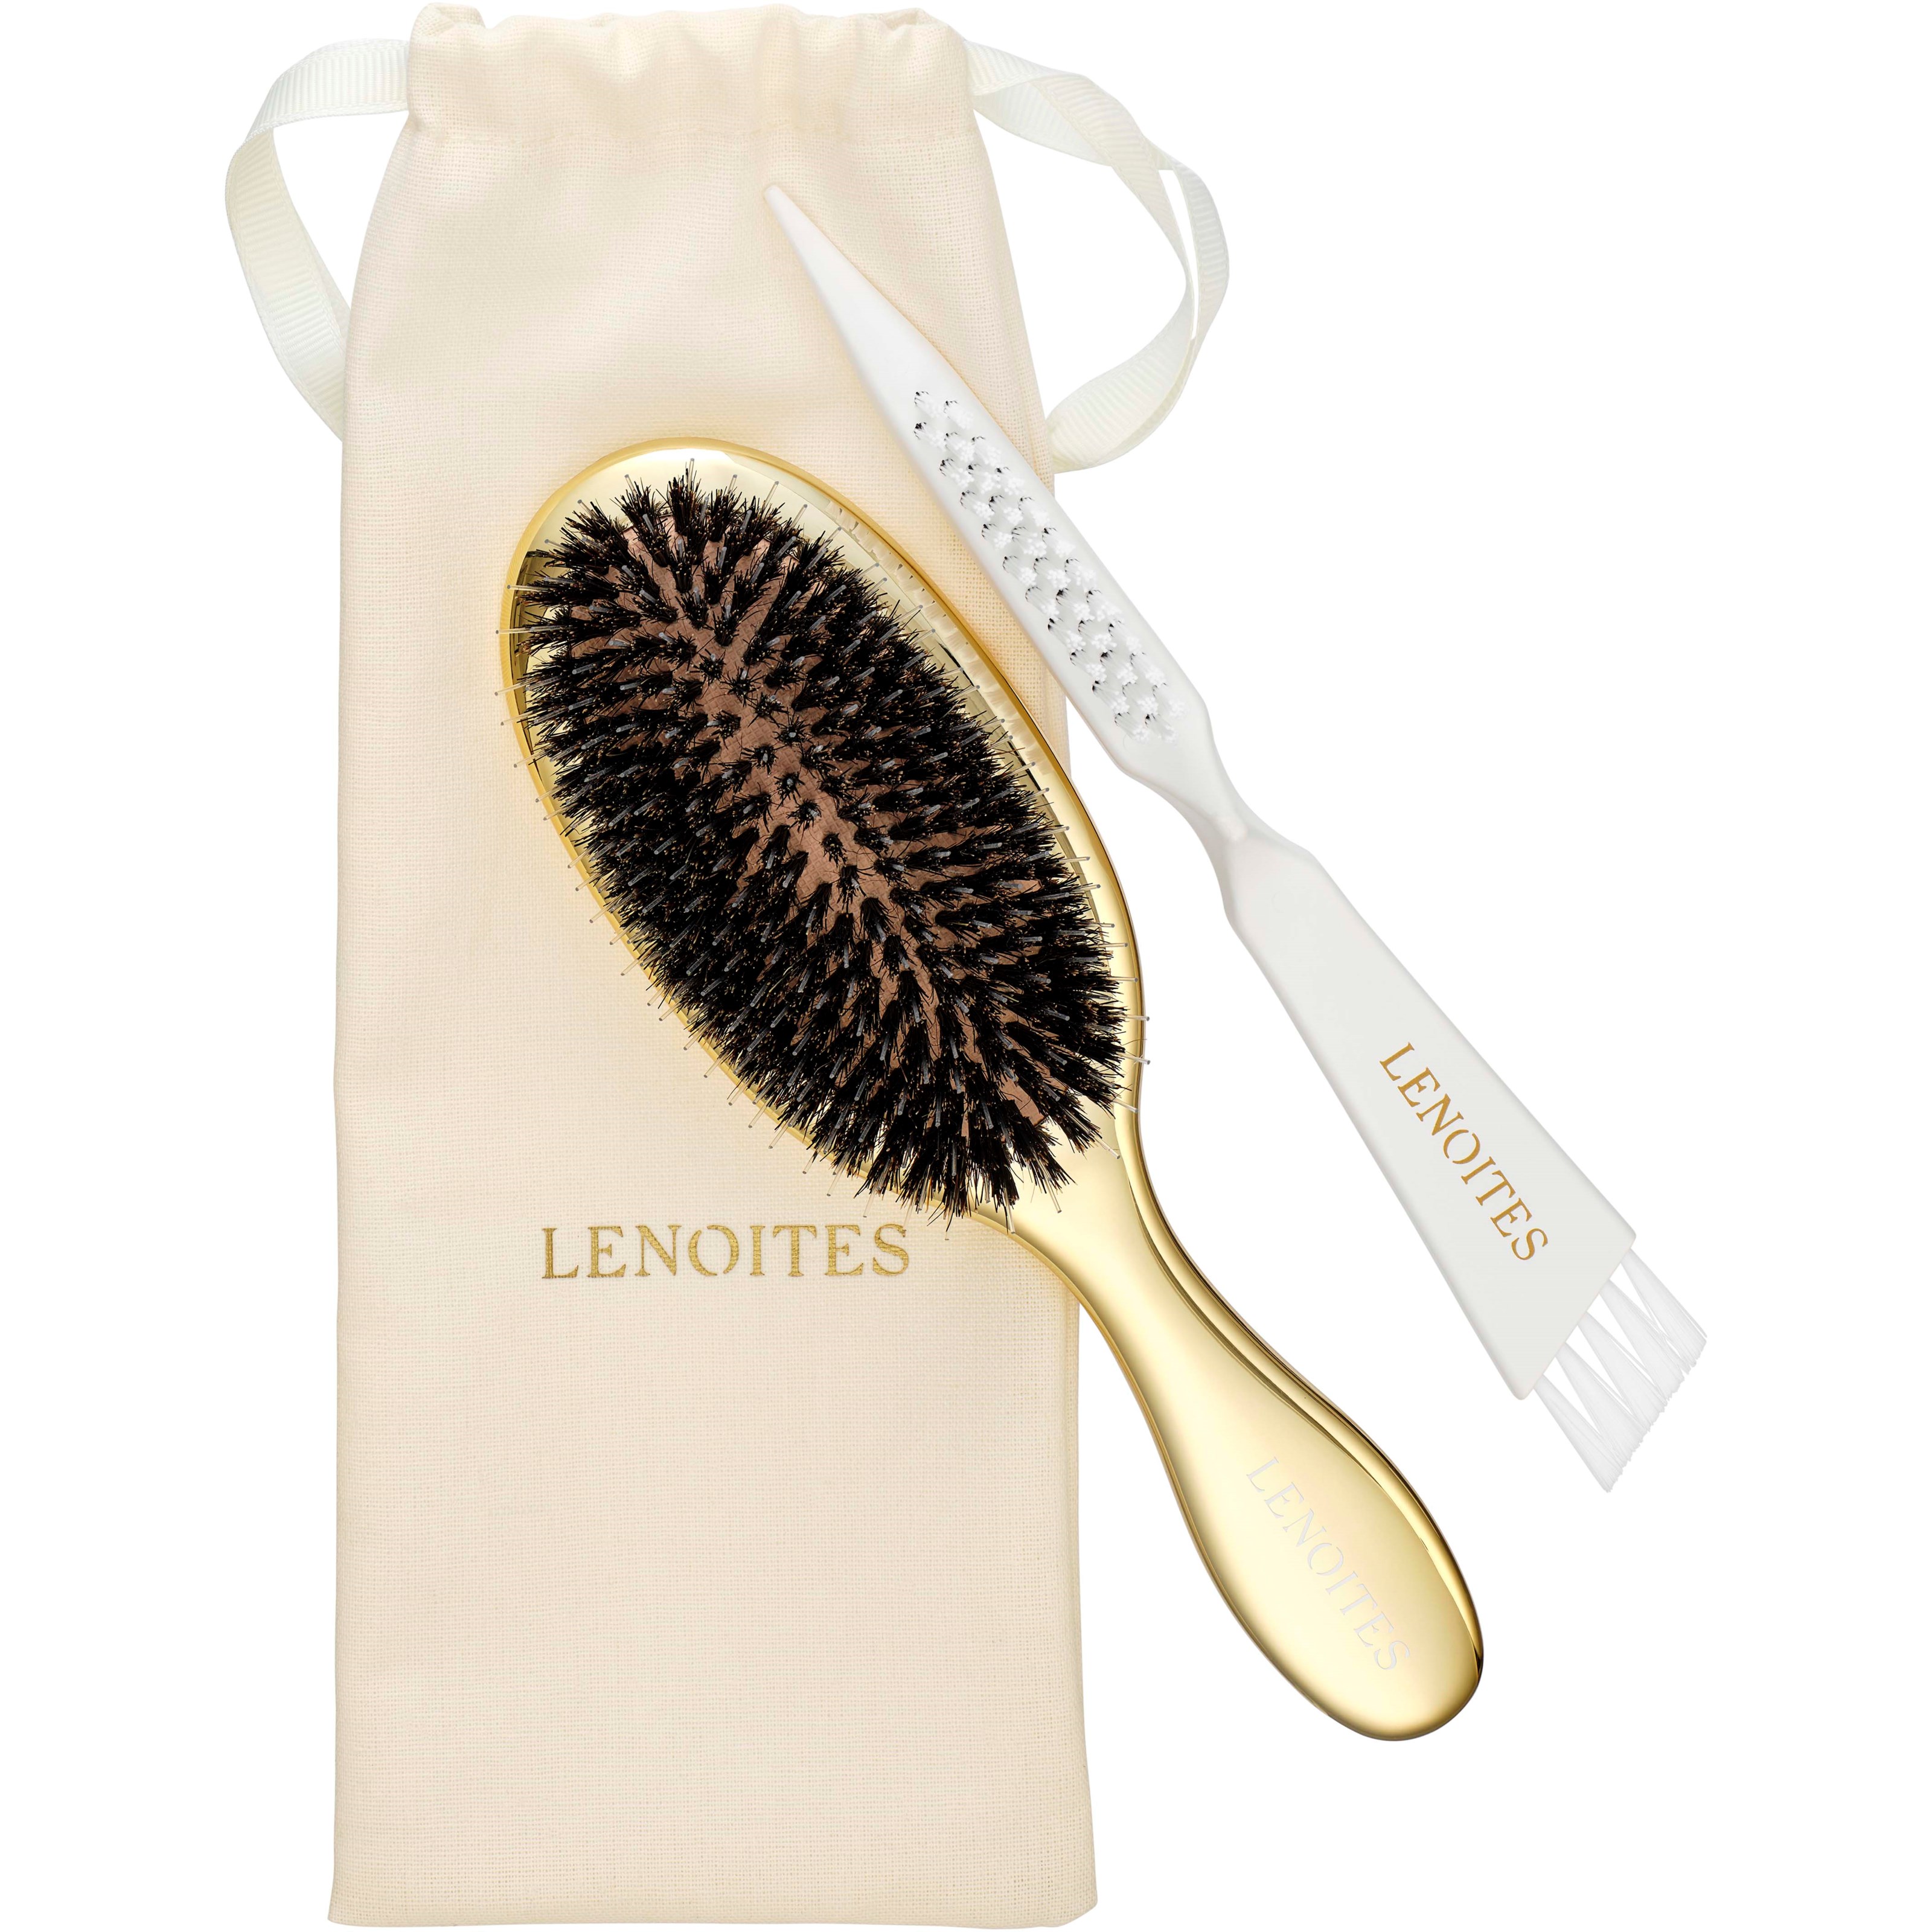 Lenoites Hair Brush Wild Boar with pouch and cleaner tool